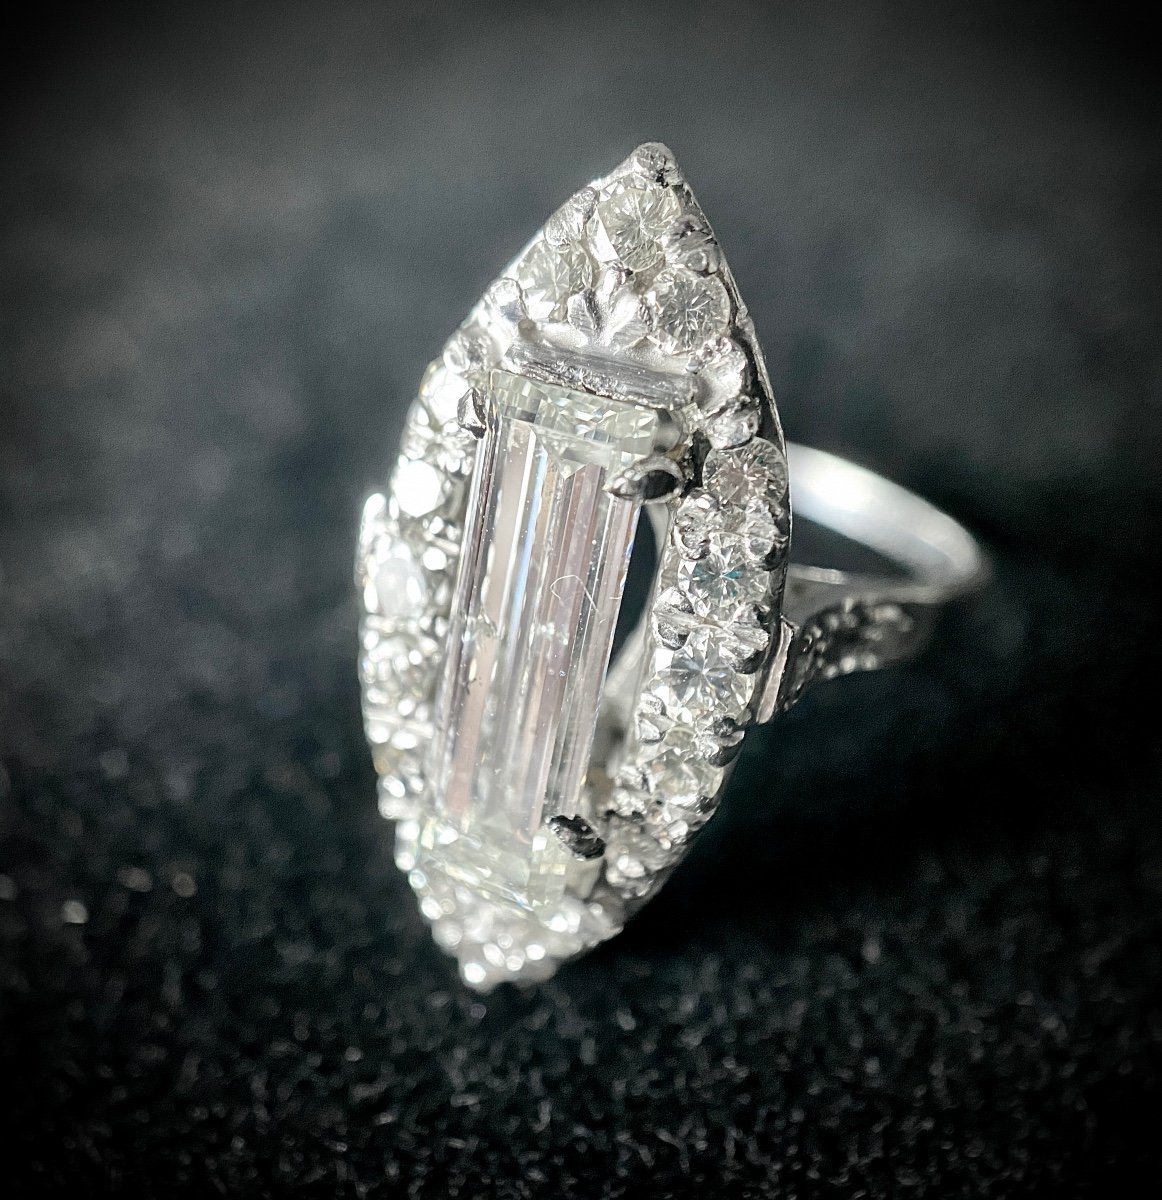 Marquise Ring Set With A 2 Carat Diamond And 1 Carat Of Brilliants-photo-5